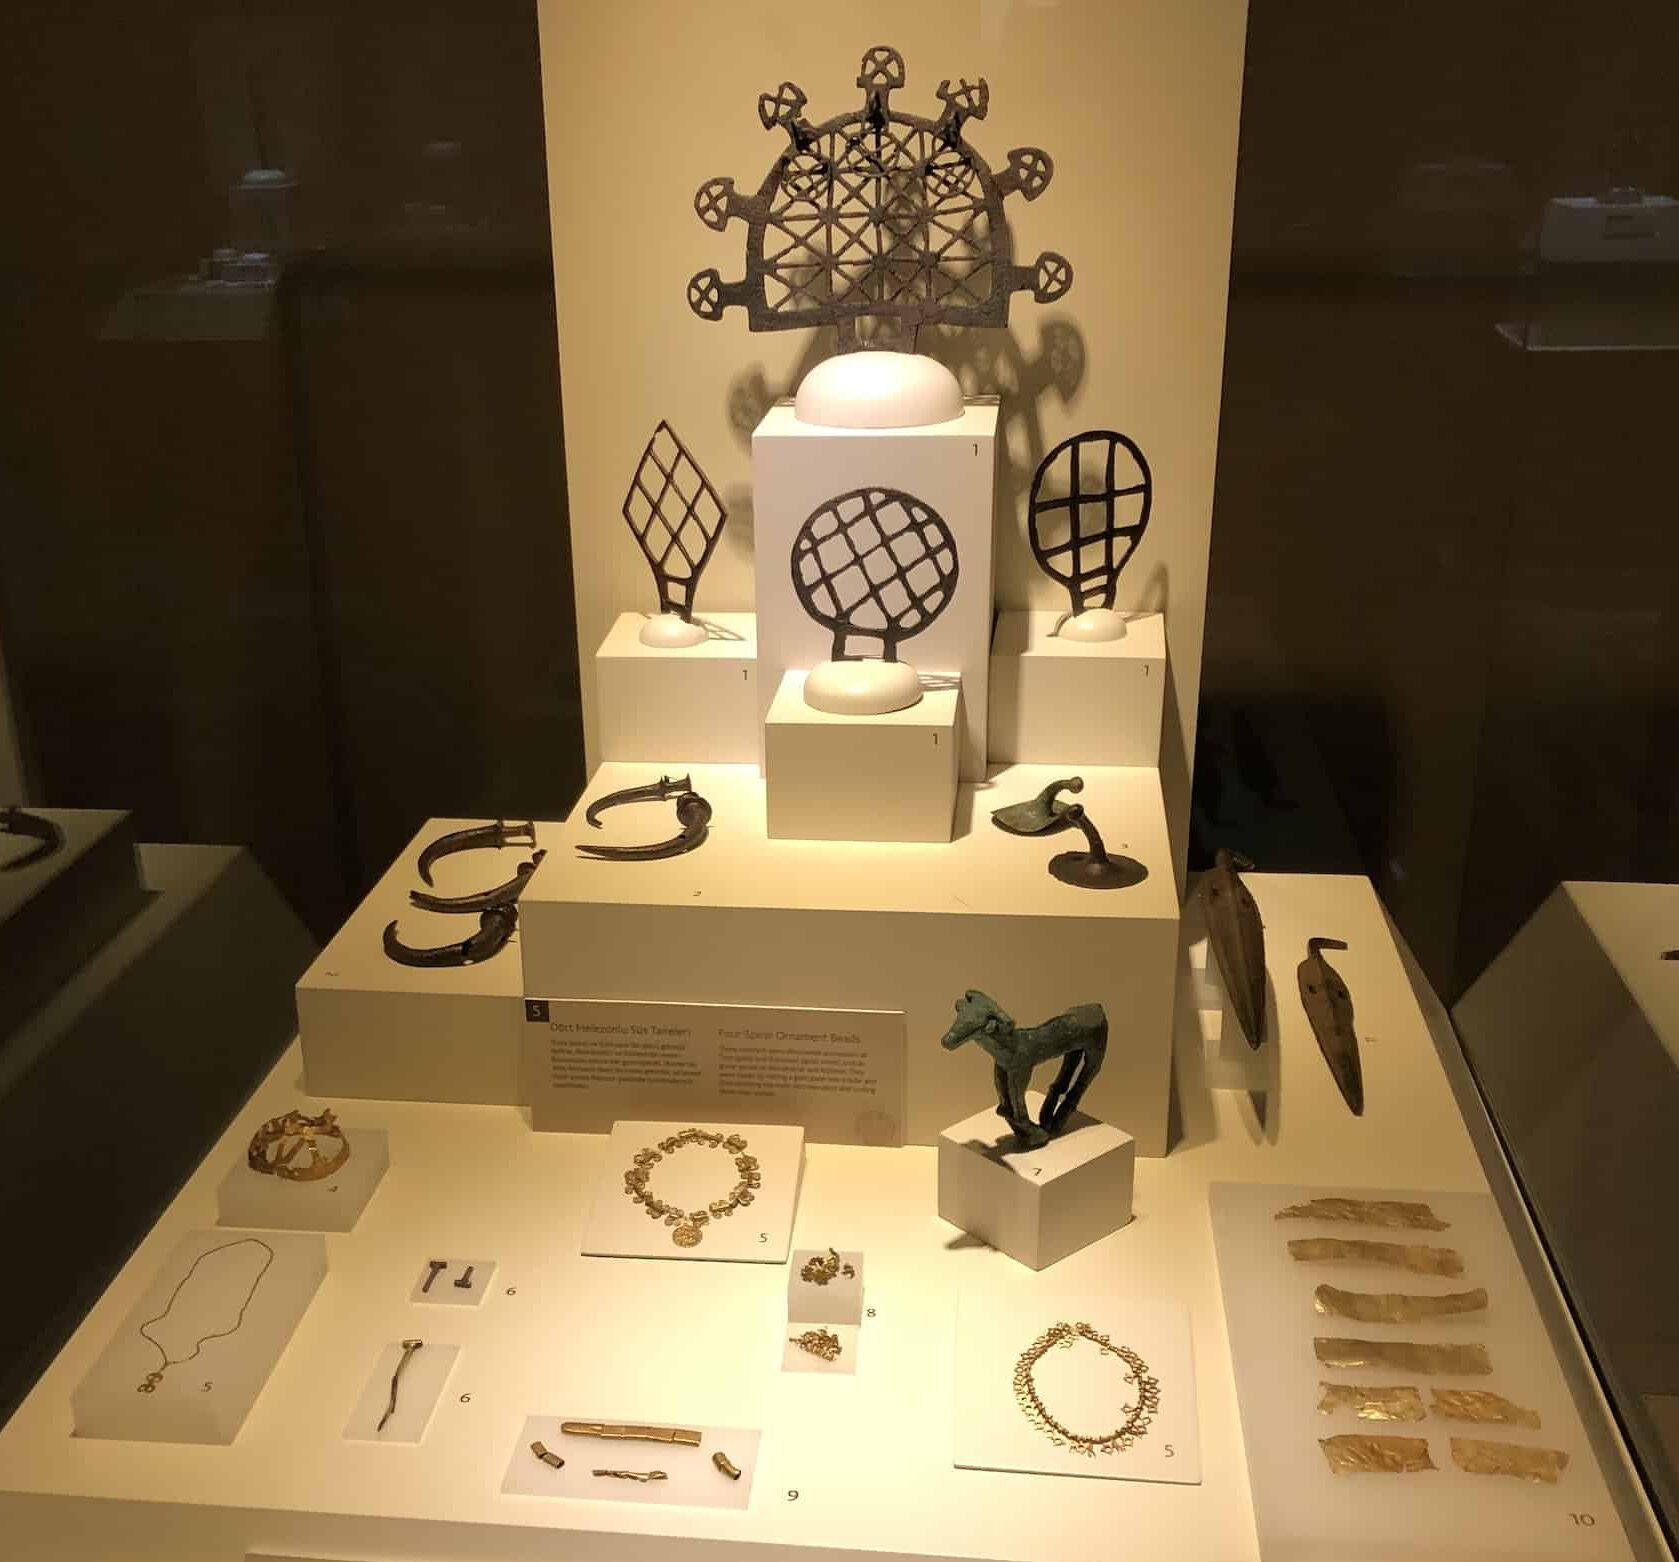 Finds from Grave TM at Alacahöyük